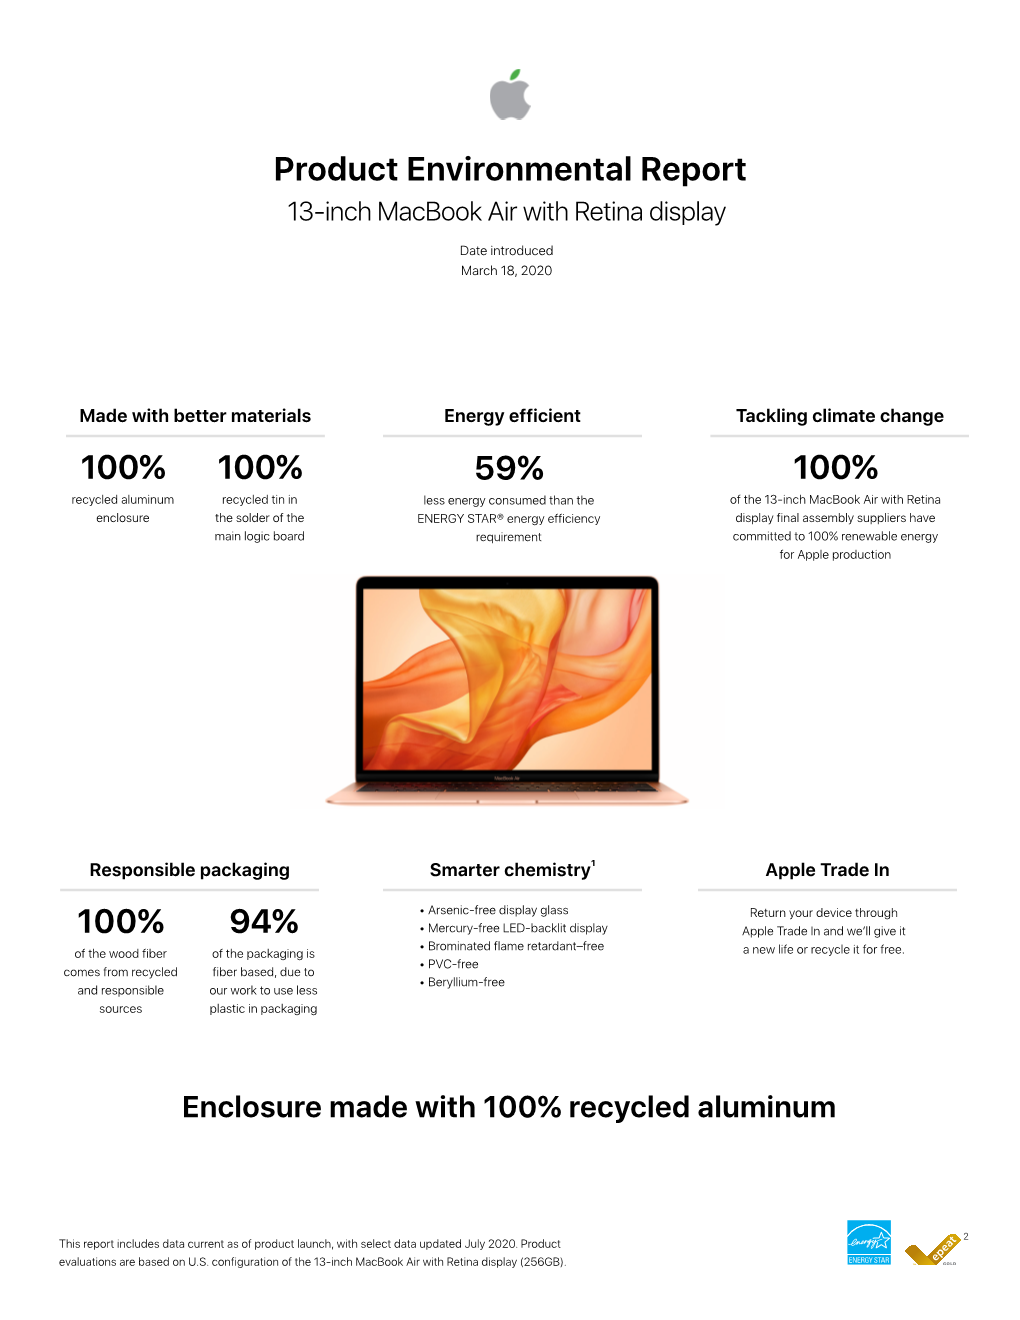 13-Inch Macbook Air with Retina Display Product Environmental Report